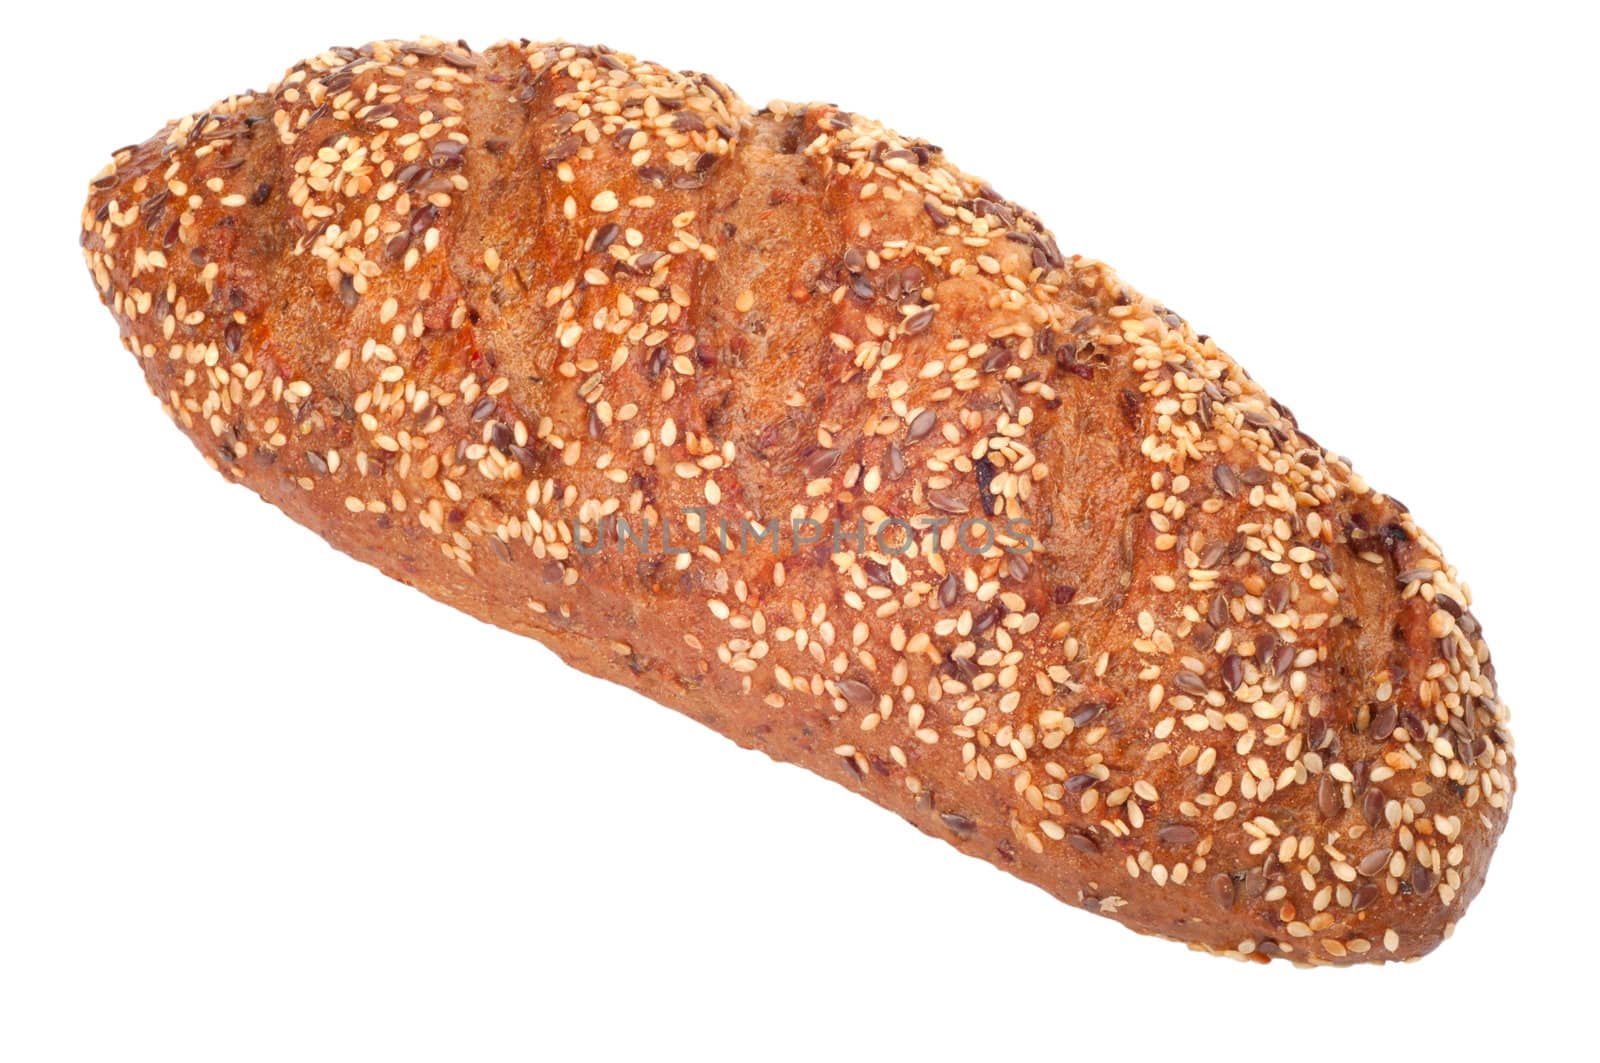 bread with sesame seeds and spices